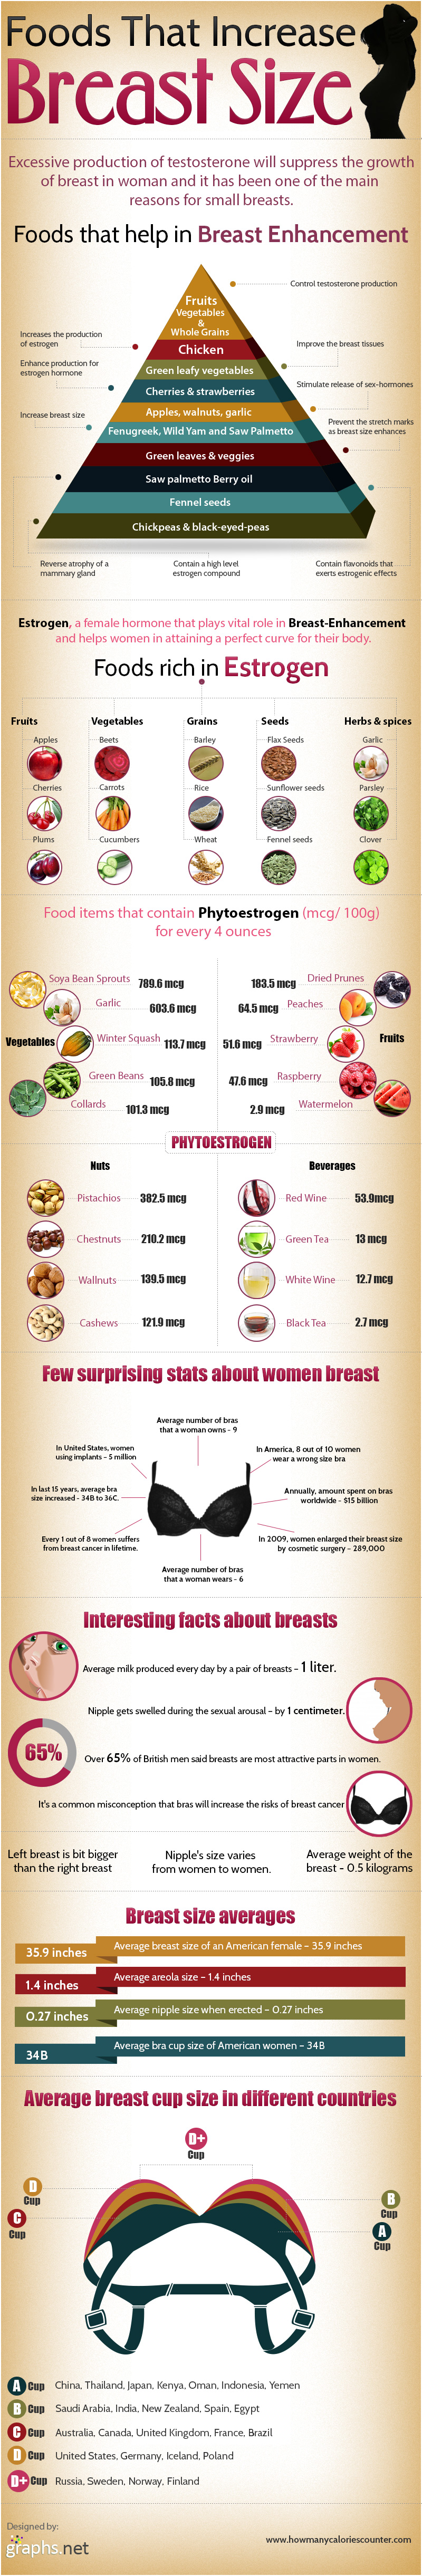 Foods that Increase Breast Size